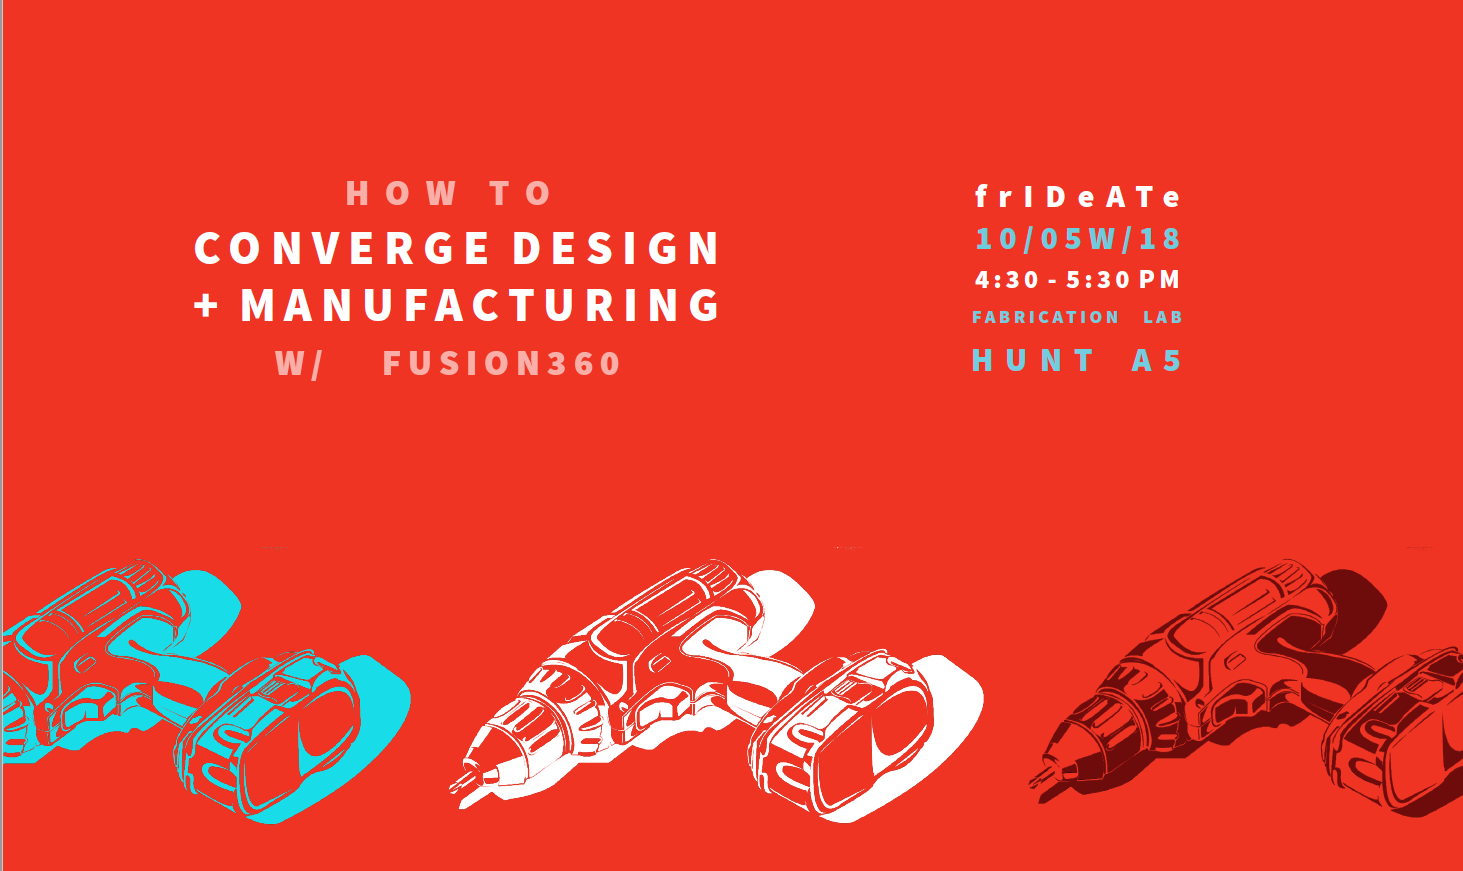 Flyer for FrIDeATe event featuring Fusion360 workshop